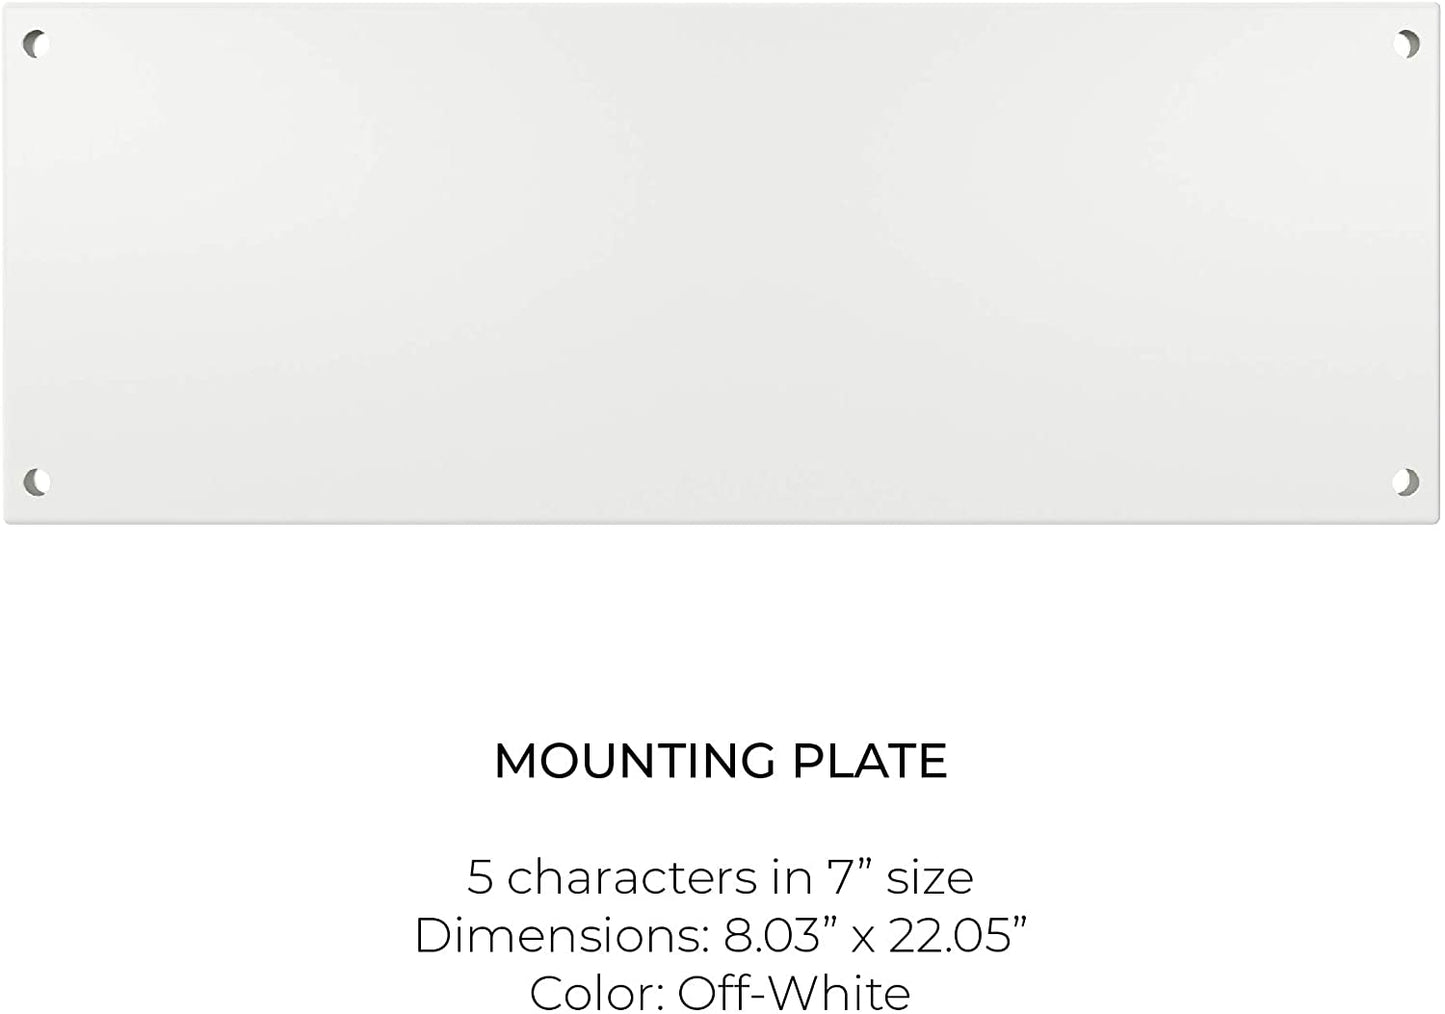 Horizontal Mounting Plate 7" Inch Size For Use With 7" Characters  (Bronze, Charcoal Grey, Off White)